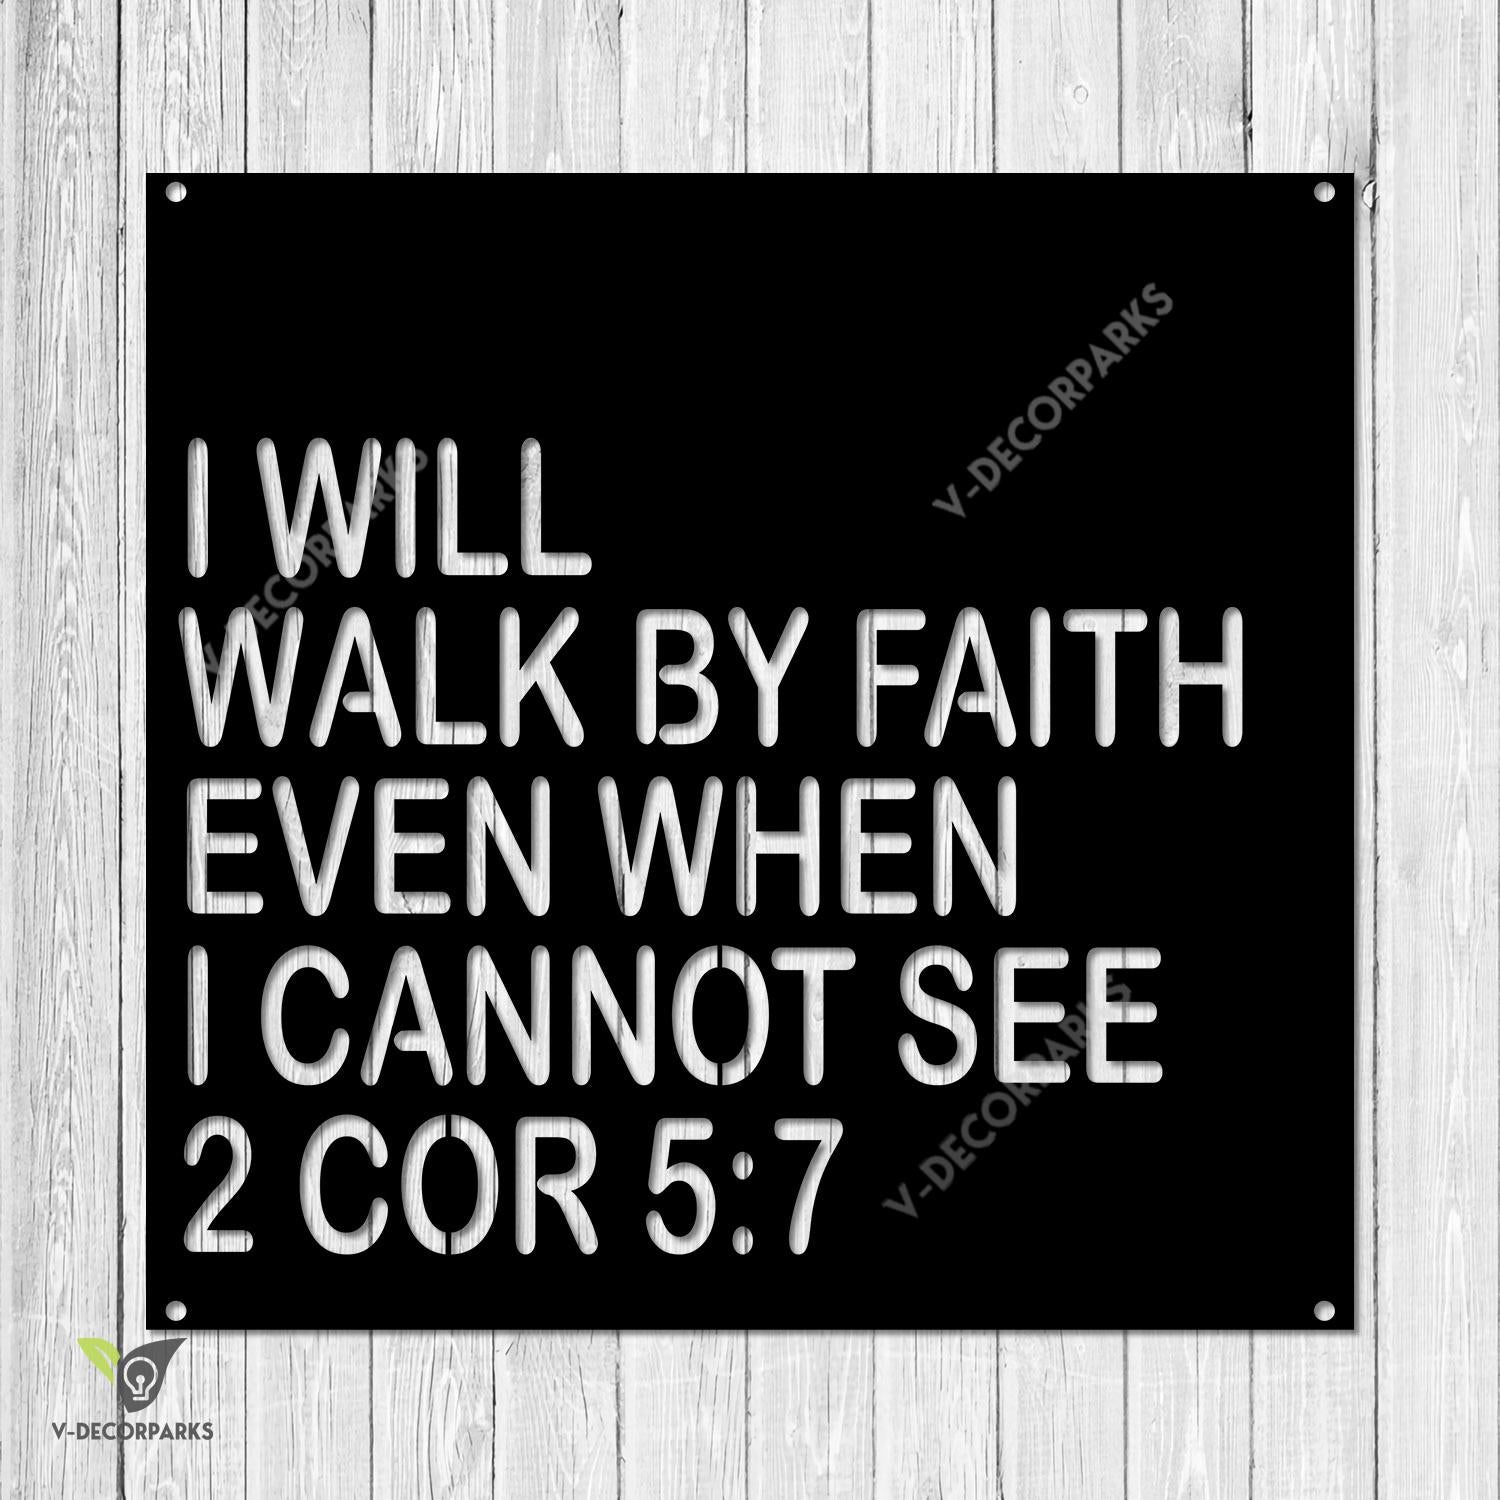 I Will Walk By Faith Even When I Cannot See 2 Cor 5:7 Metal Sign, Jesus Christ, God Quotes Housewarming Accent Metal Sign